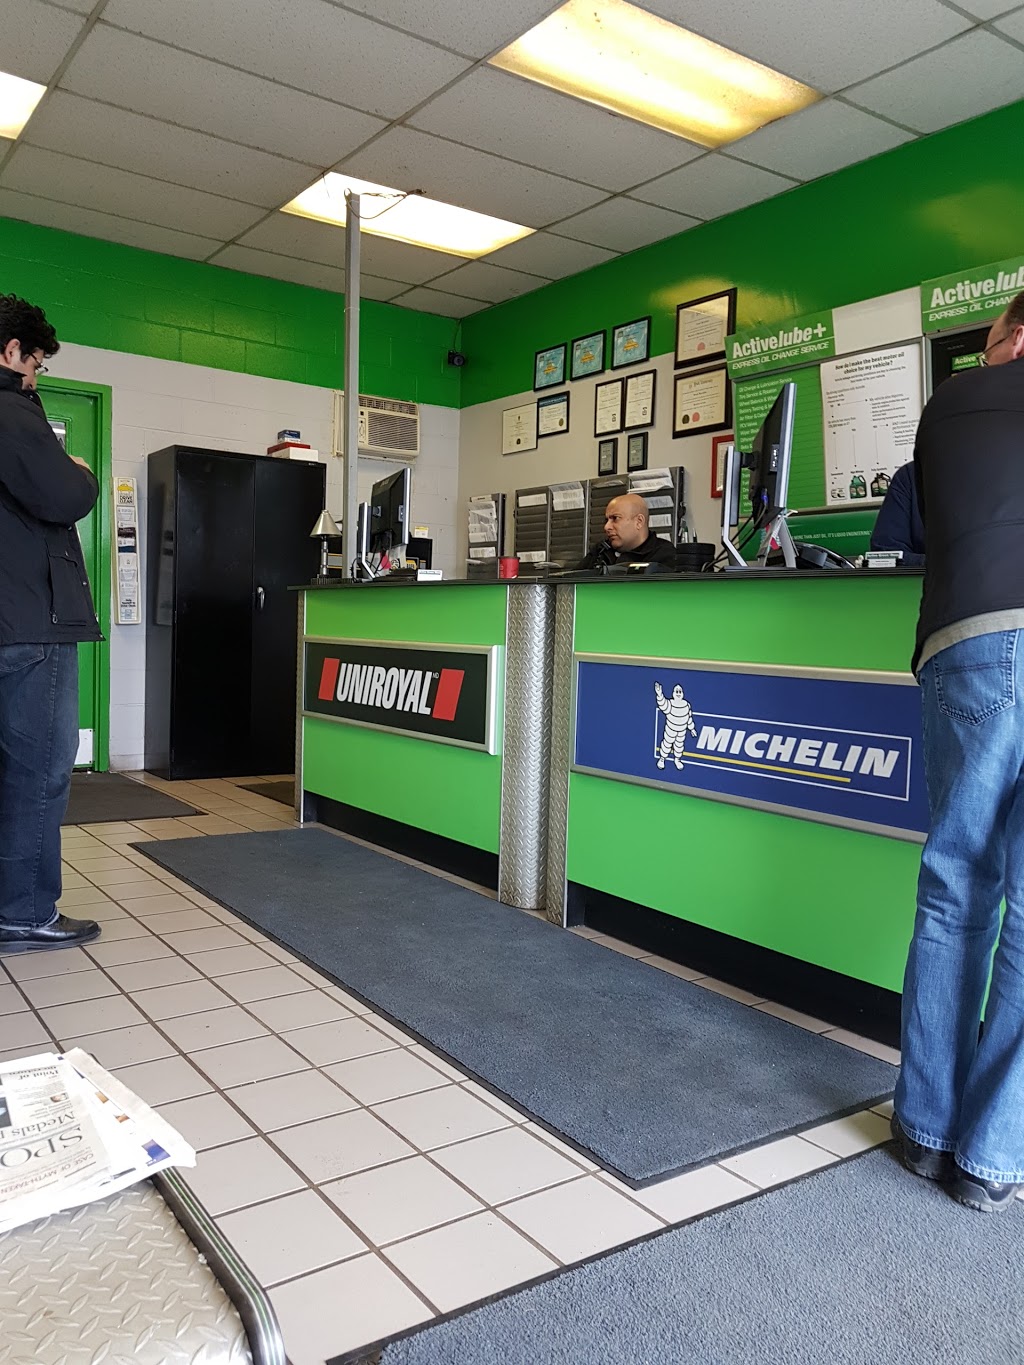 Active Green+Ross Tire & Automotive Centre | 667 Fourth Line (at, Speers Rd, Oakville, ON L6L 5B5, Canada | Phone: (905) 842-8520